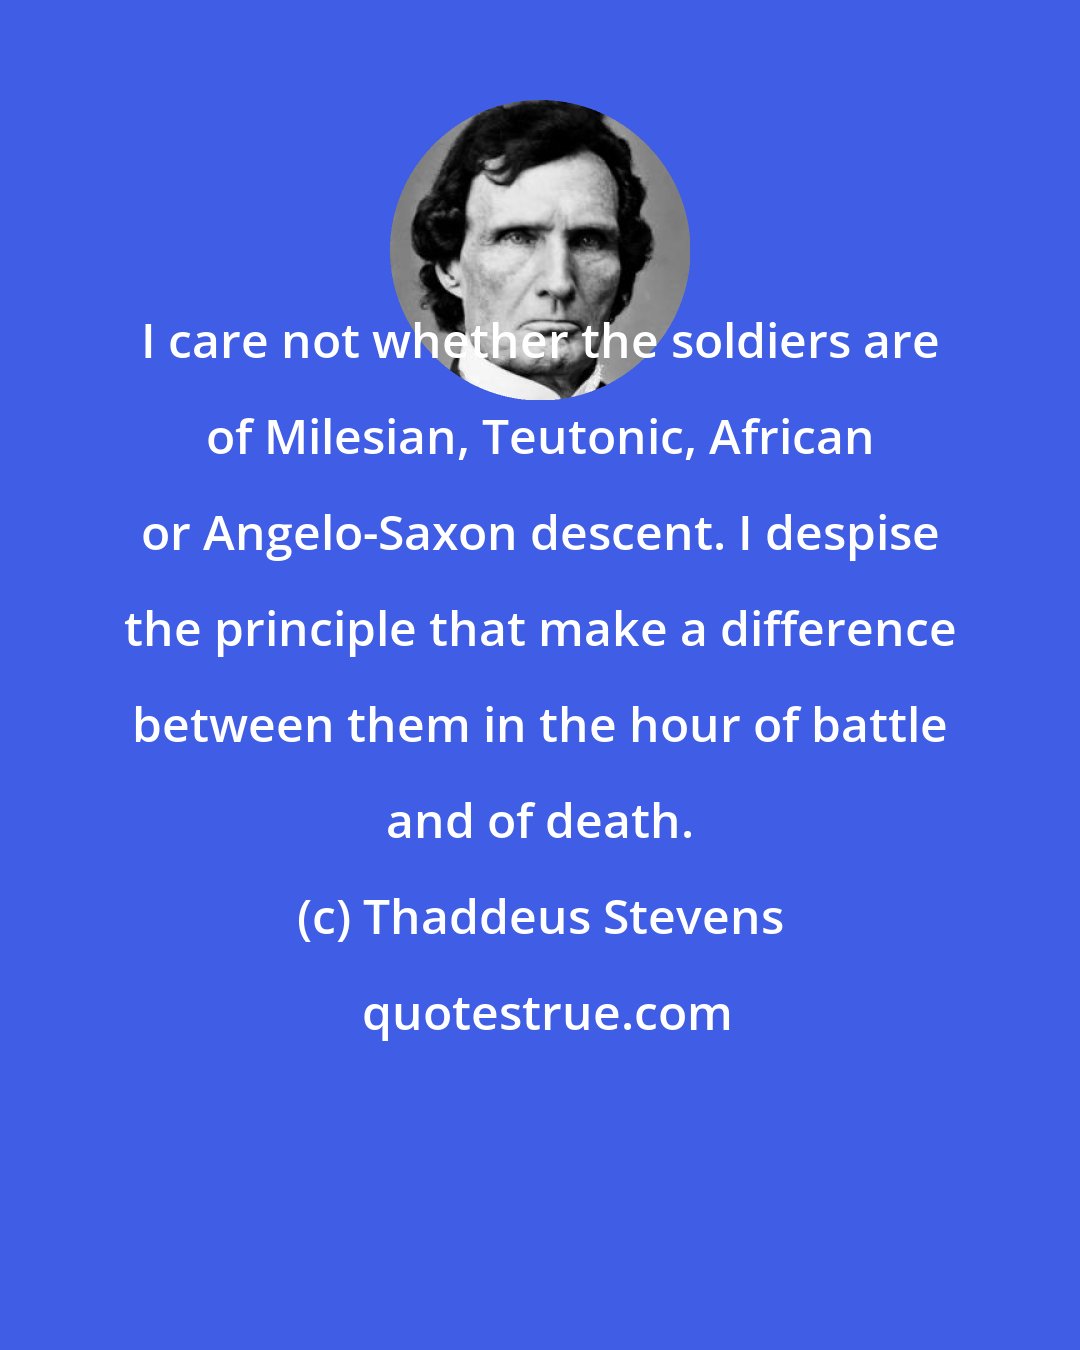 Thaddeus Stevens: I care not whether the soldiers are of Milesian, Teutonic, African or Angelo-Saxon descent. I despise the principle that make a difference between them in the hour of battle and of death.